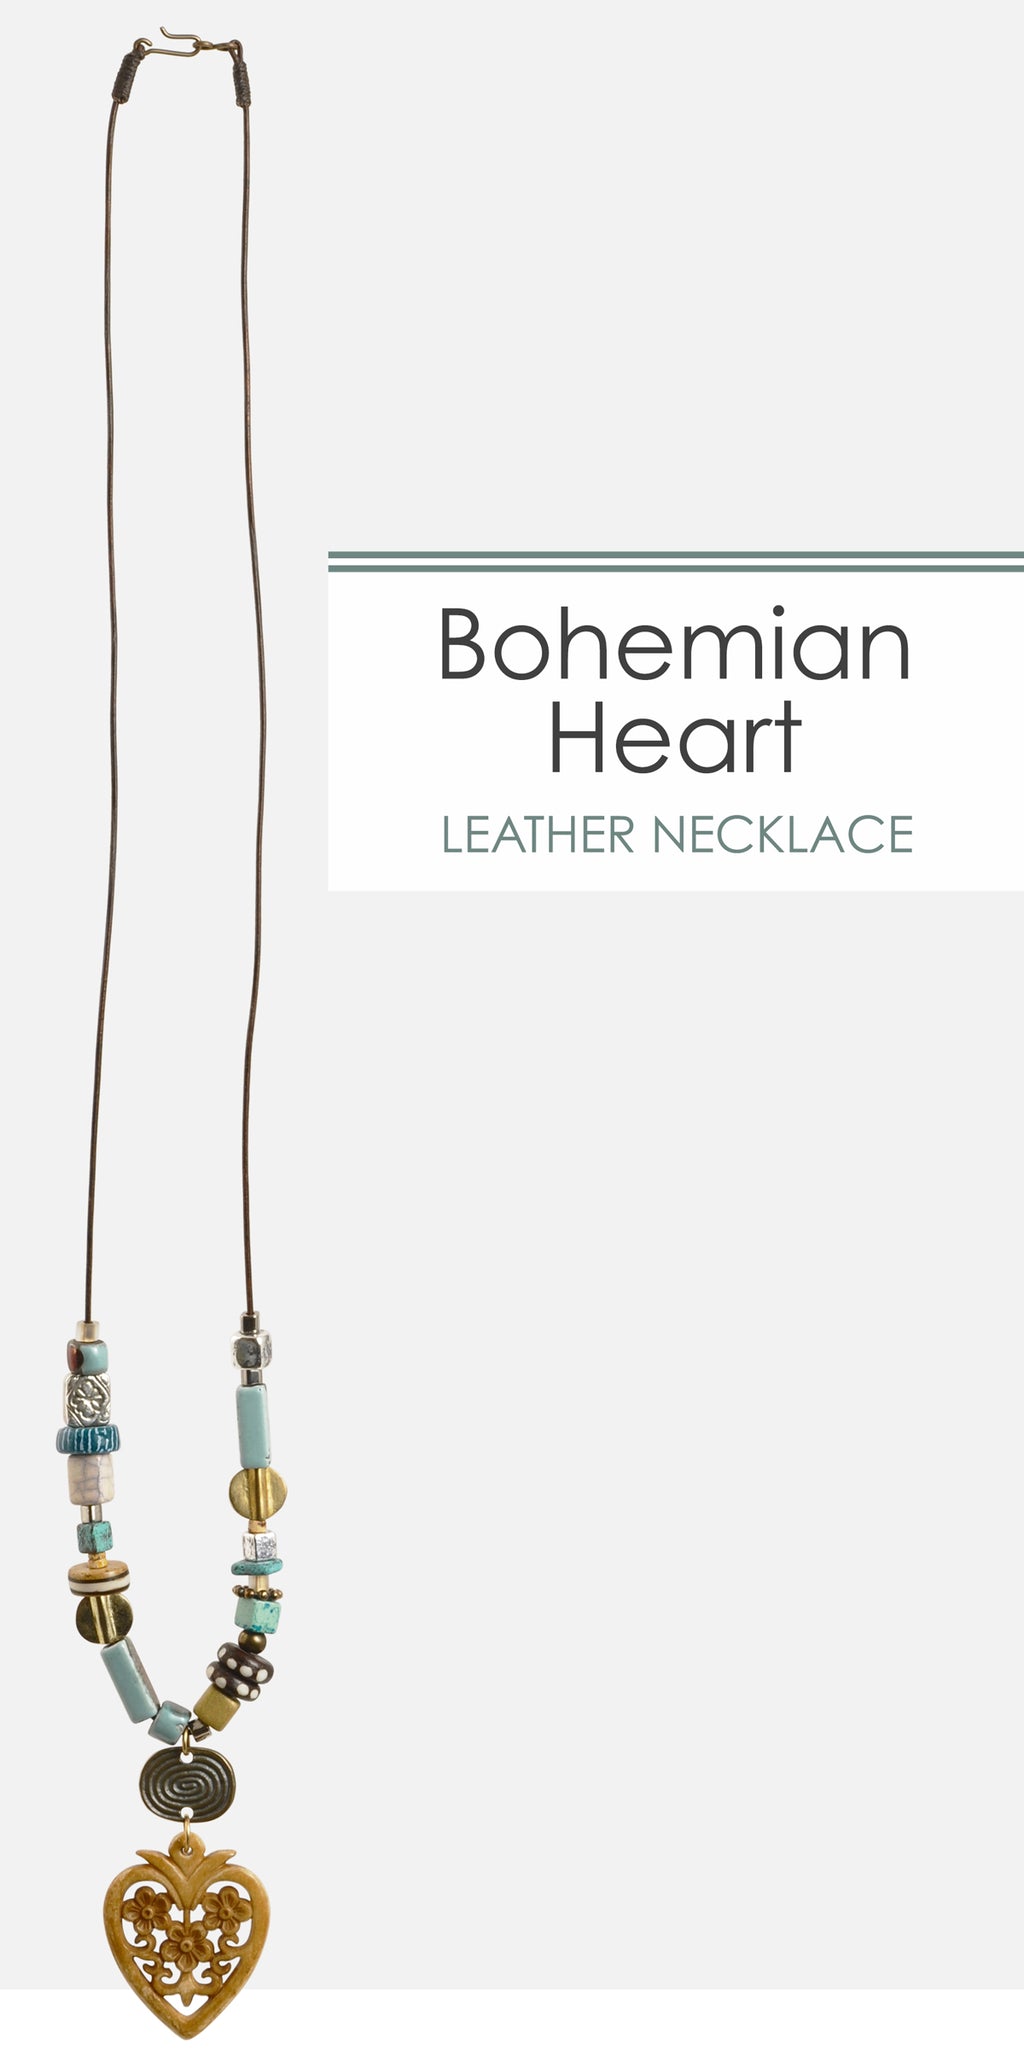 Bohemian Heart Leather Necklace choiyeonhee